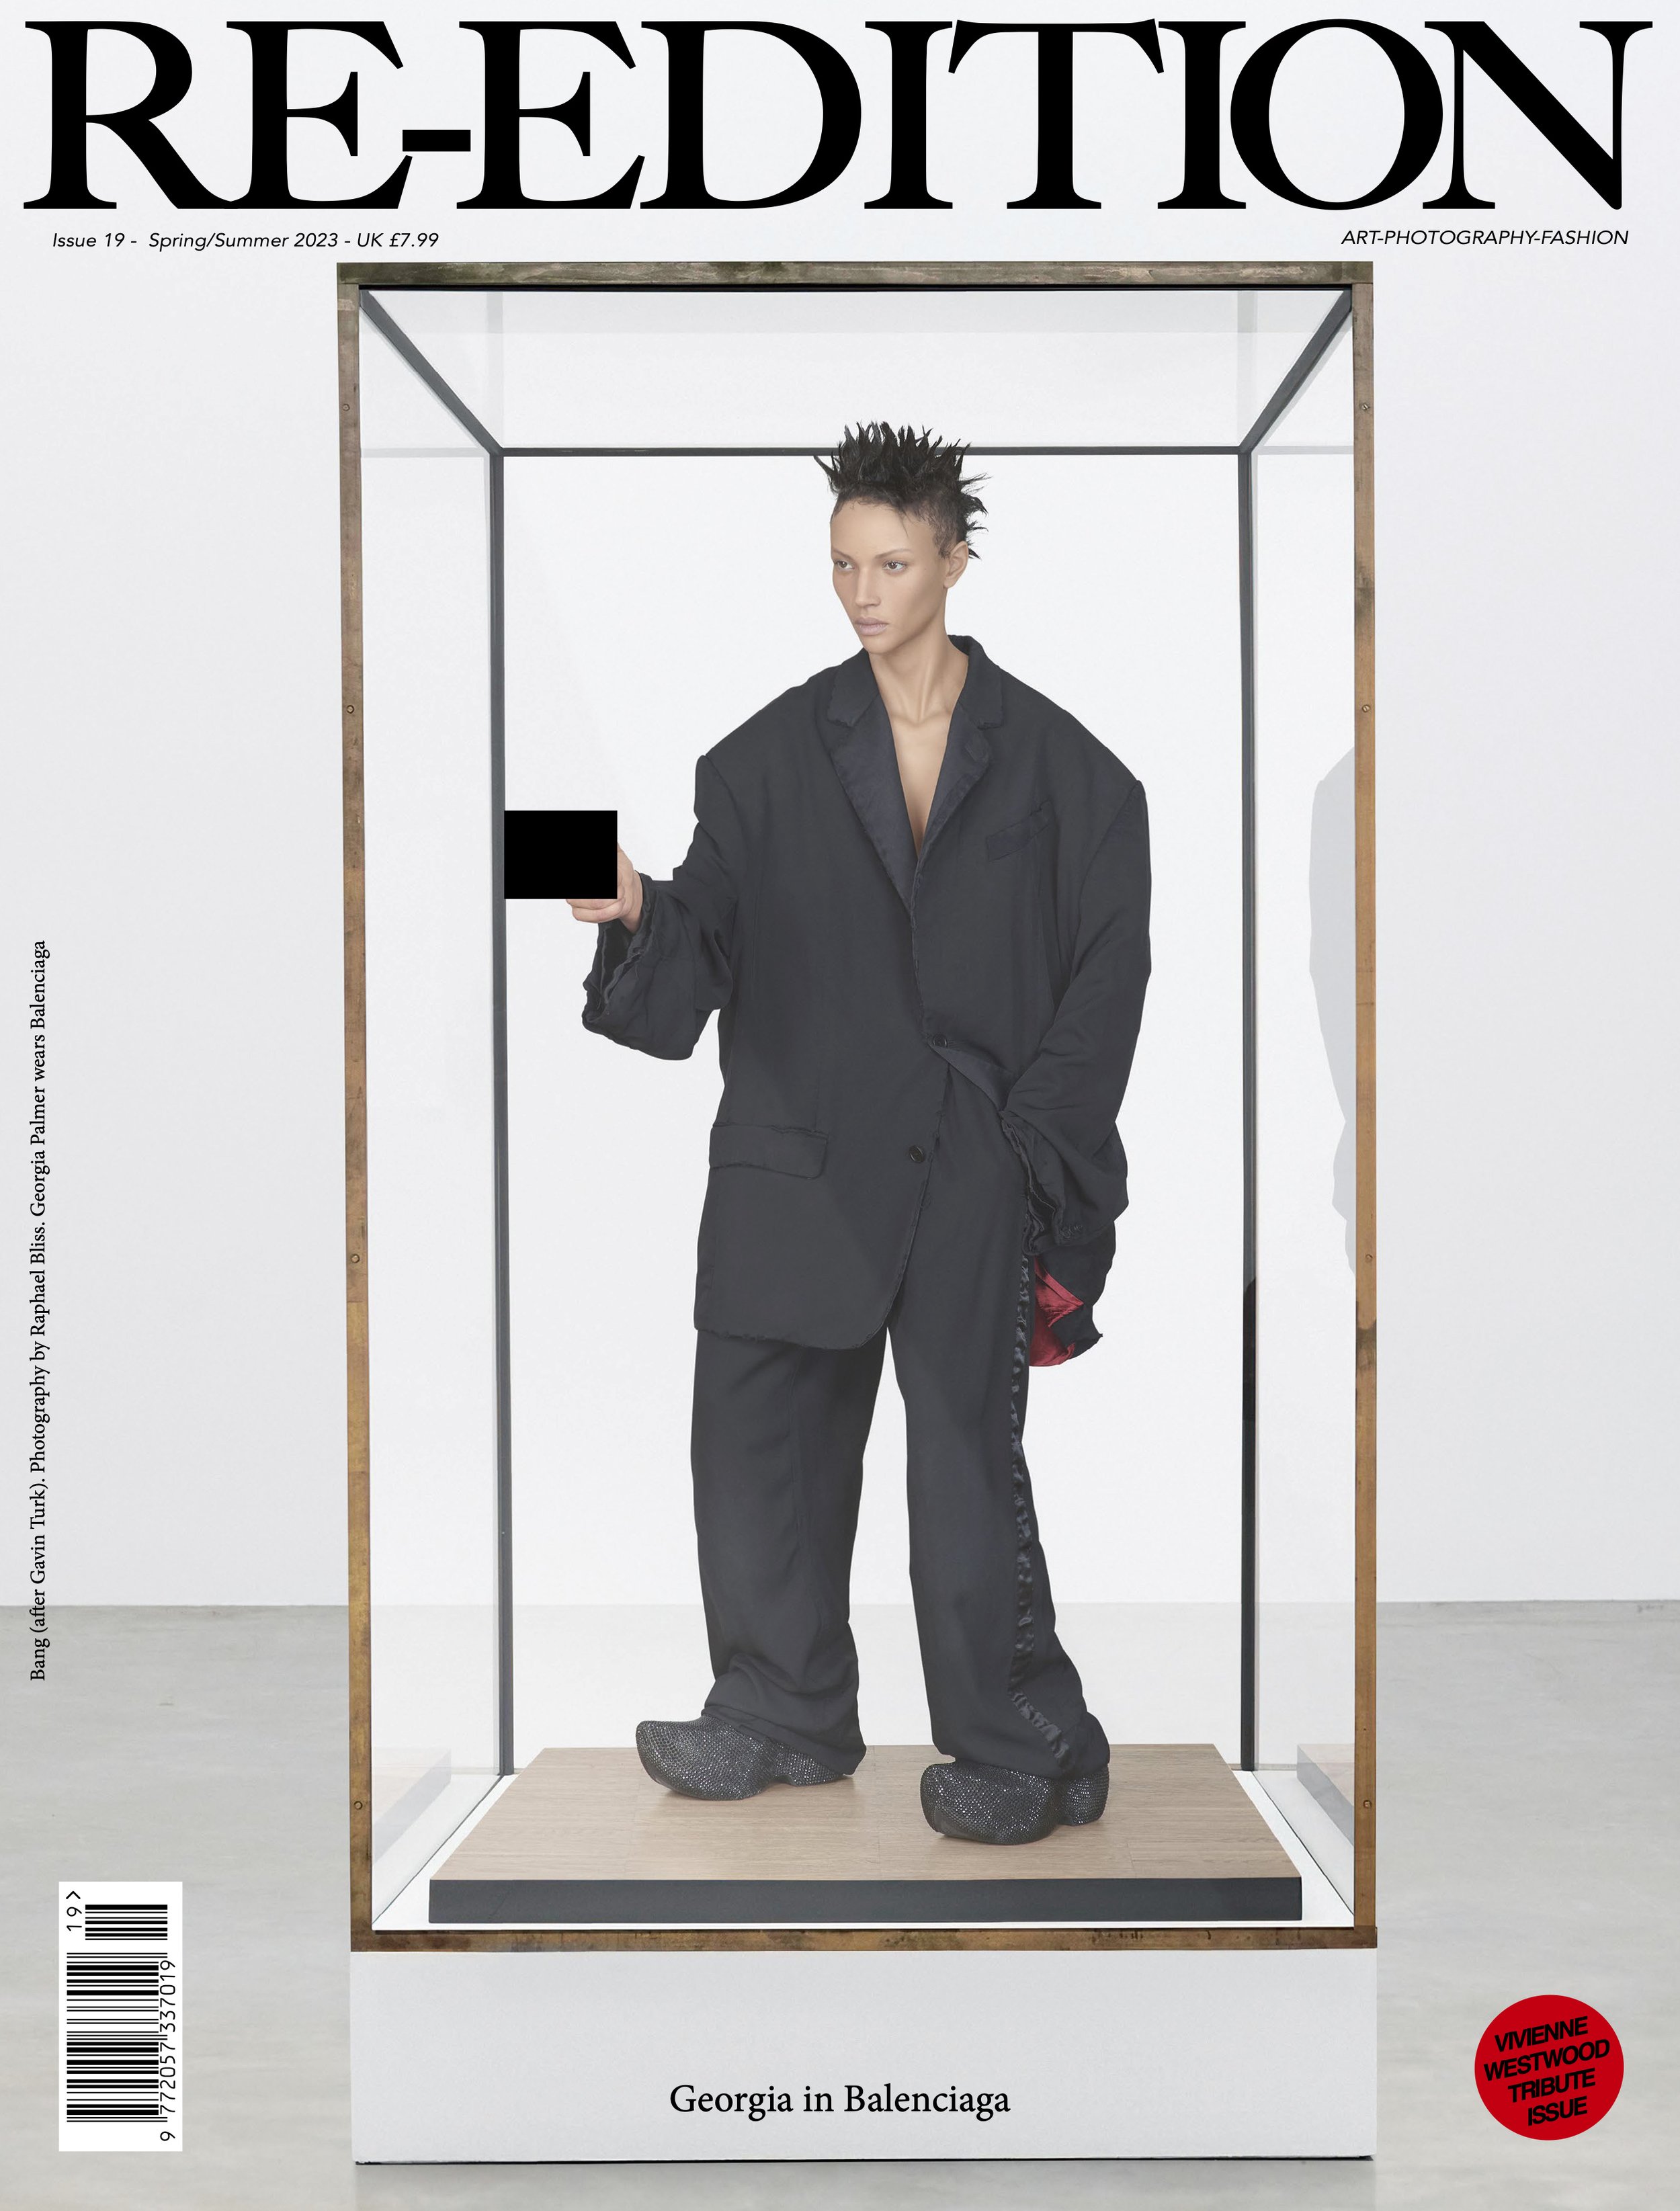 RE-EDITION SS23 ISSUE 19 - RAPHAEL BLISS - BETSY JOHNSON - COVER.jpg